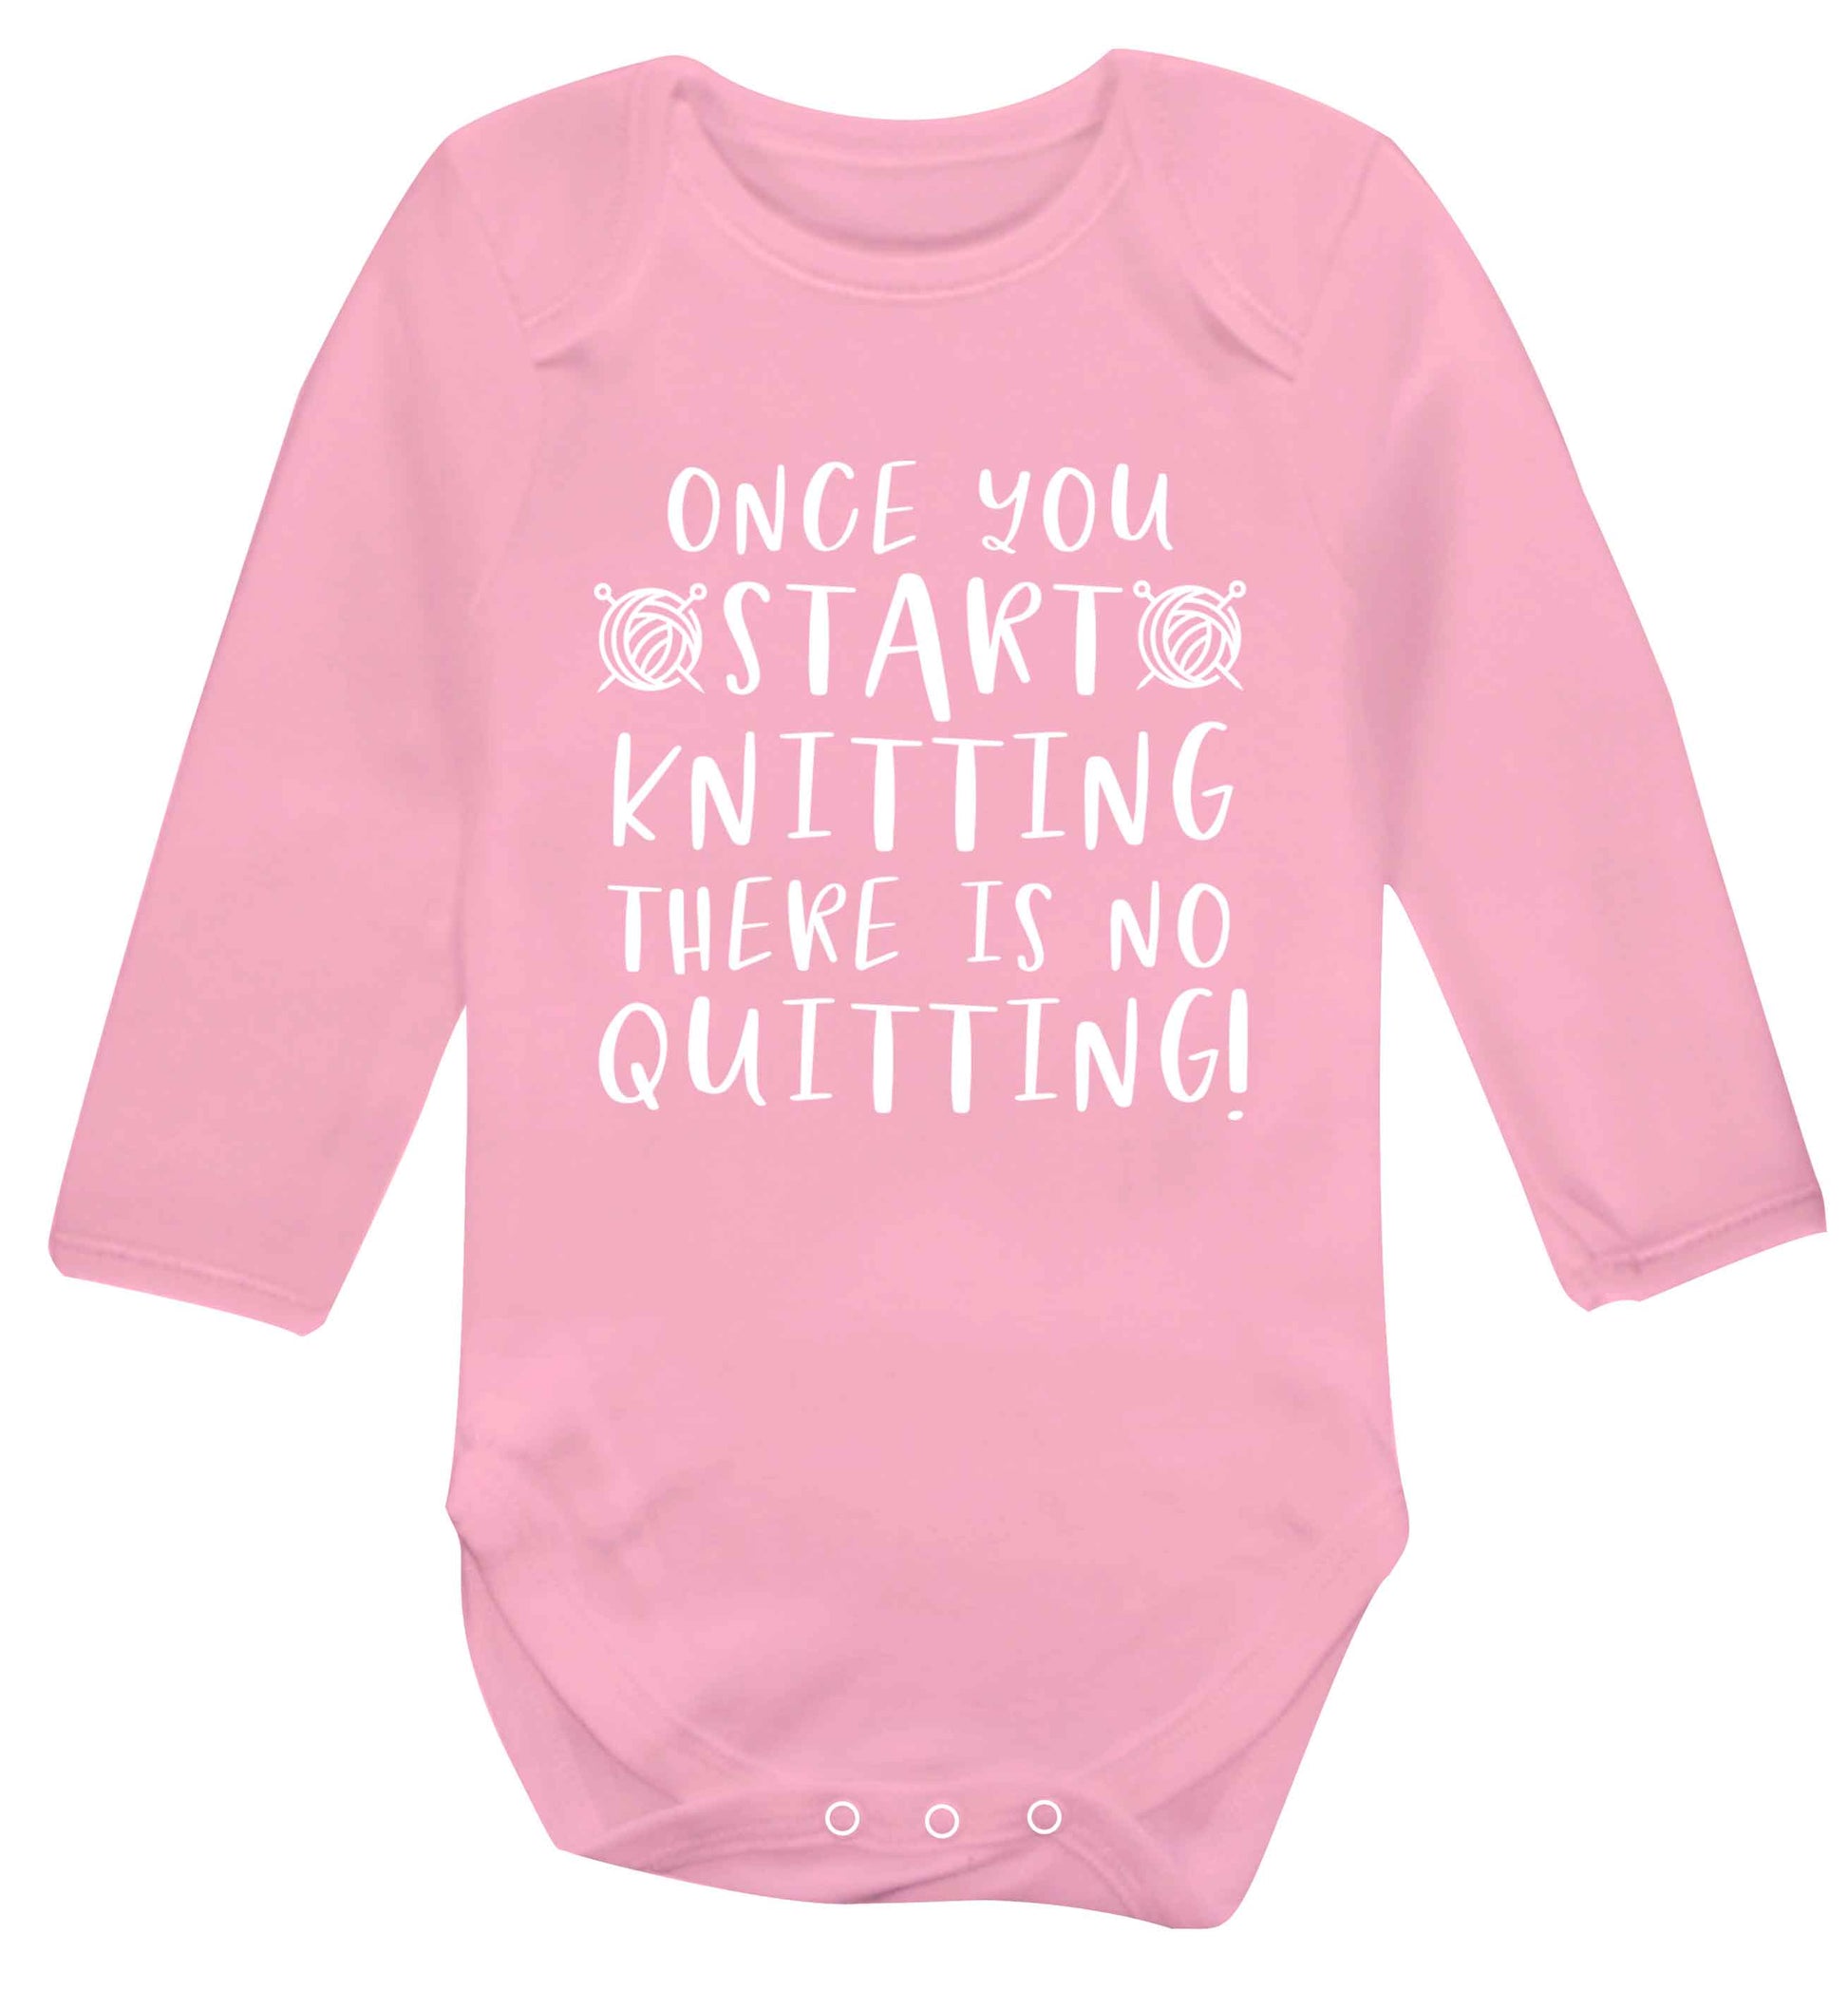 Once you start knitting there is no quitting! Baby Vest long sleeved pale pink 6-12 months